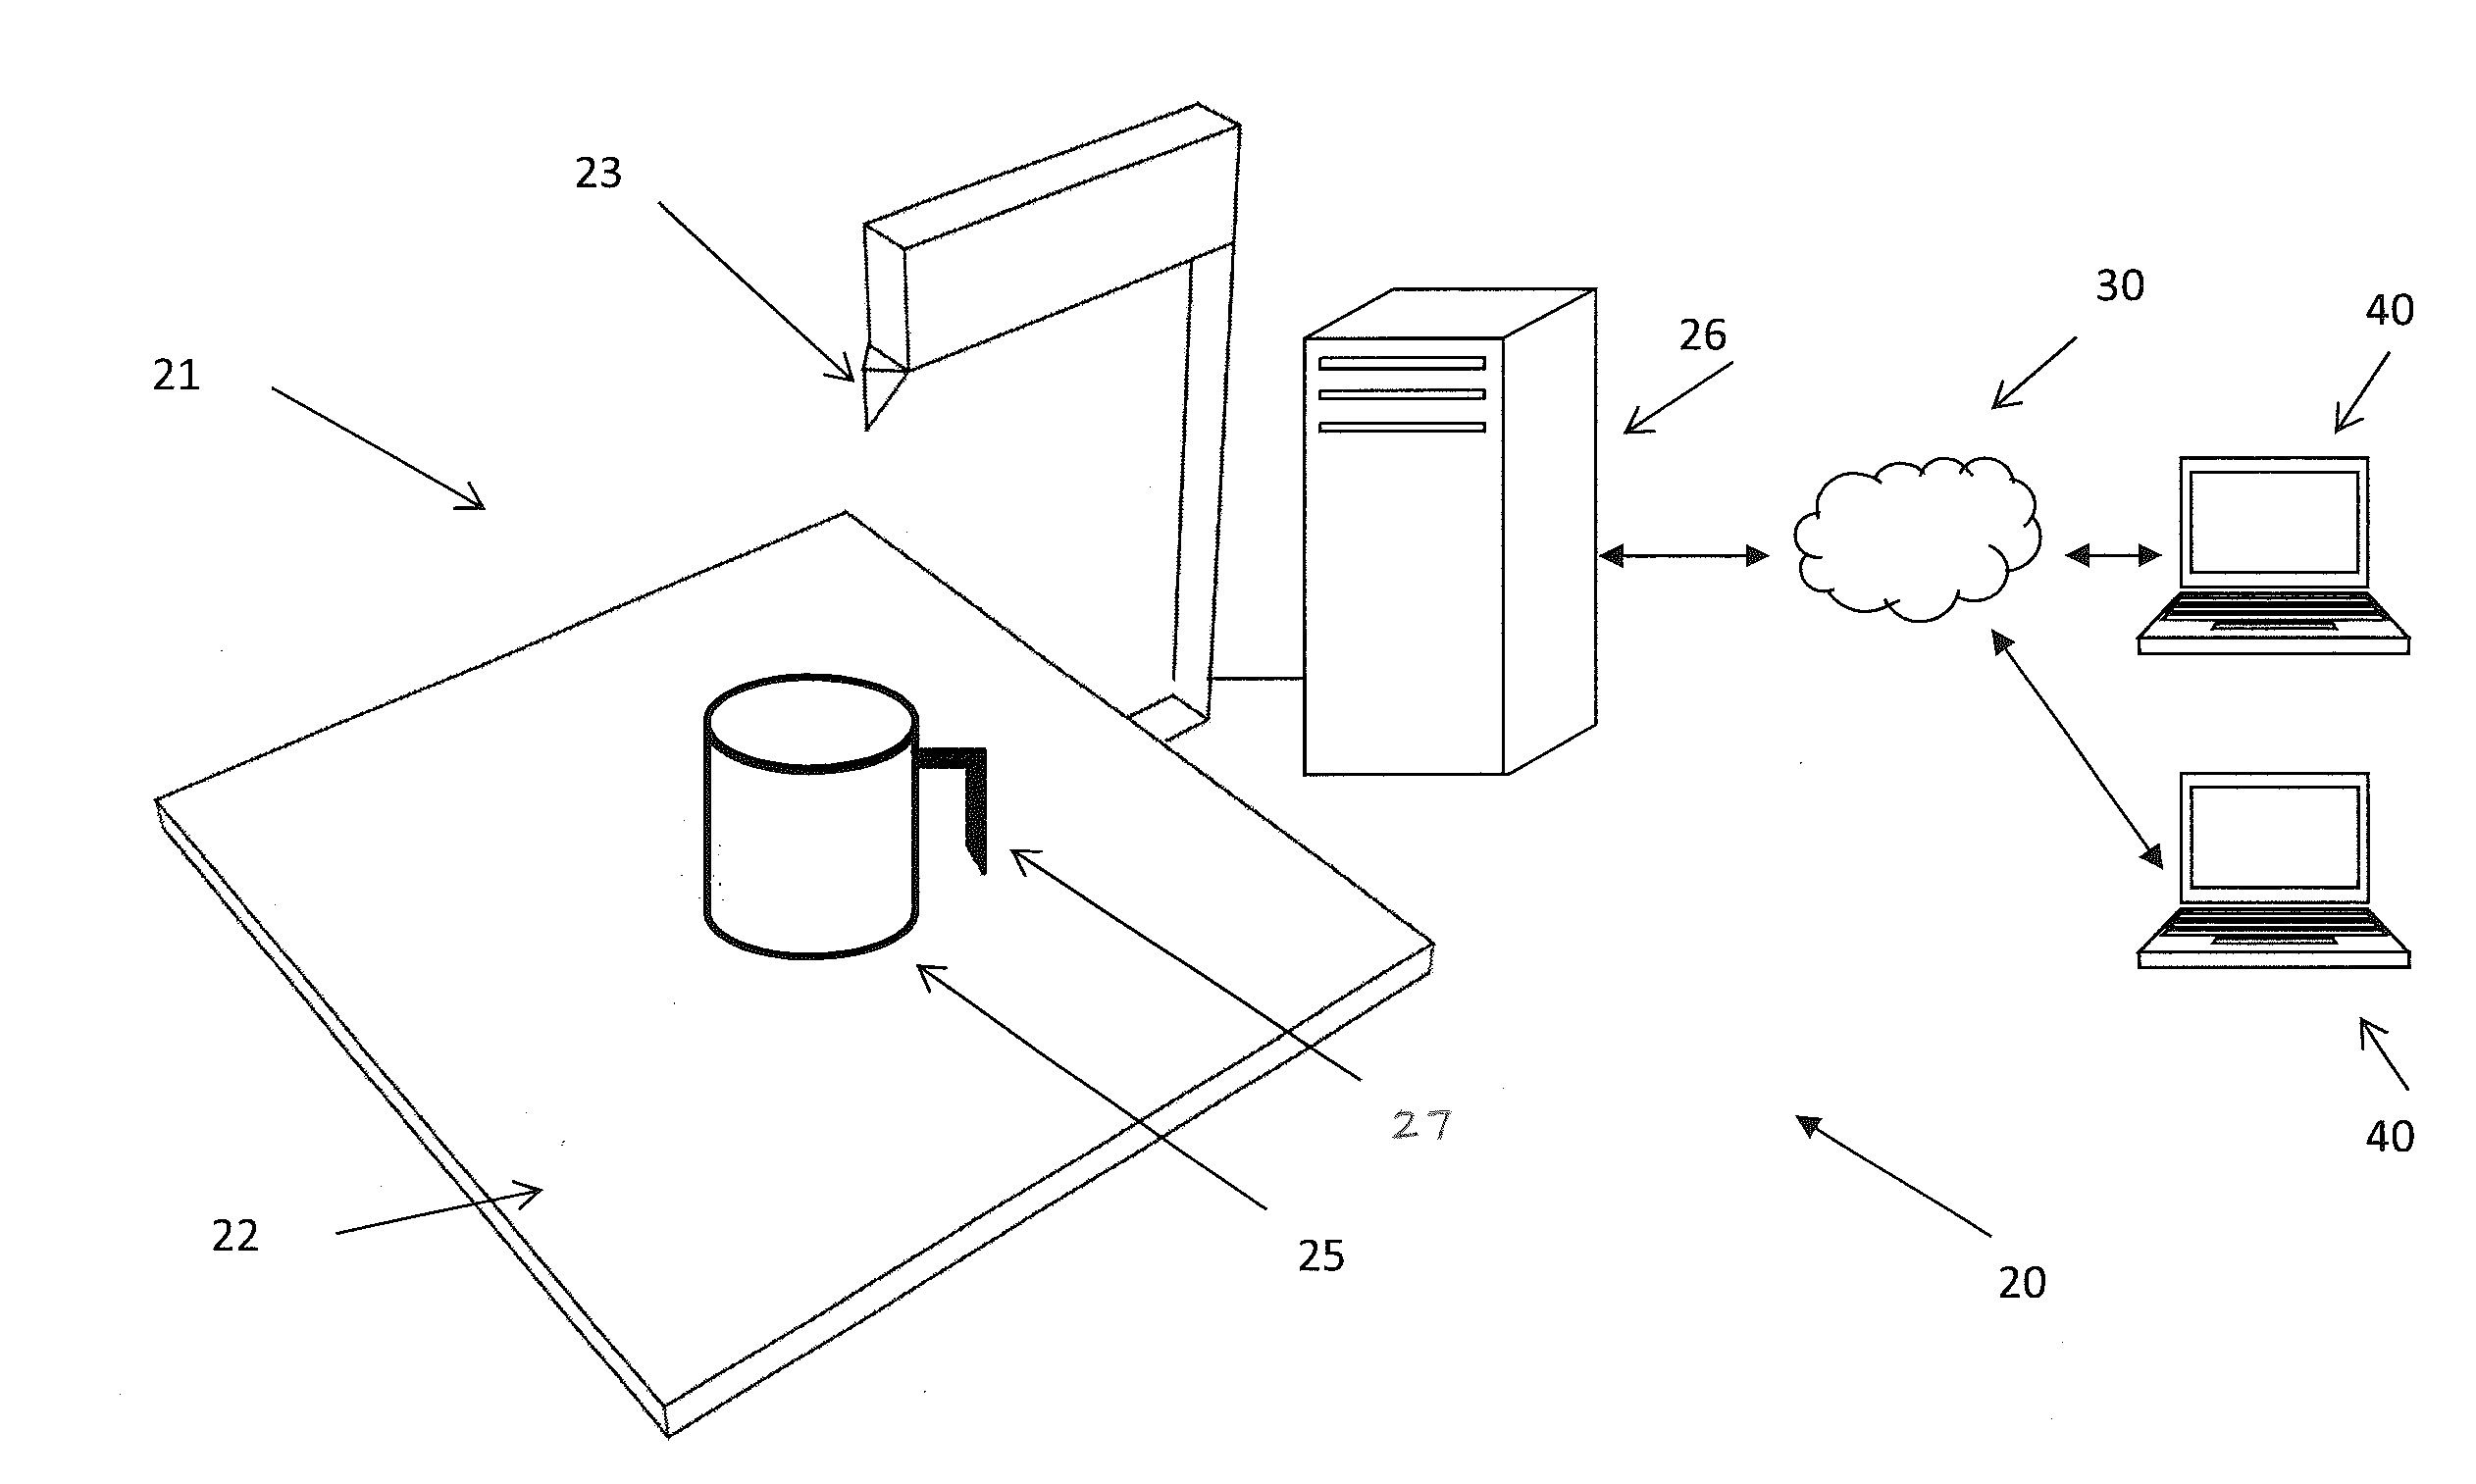 Method for visually augmenting a real object with a computer-generated image